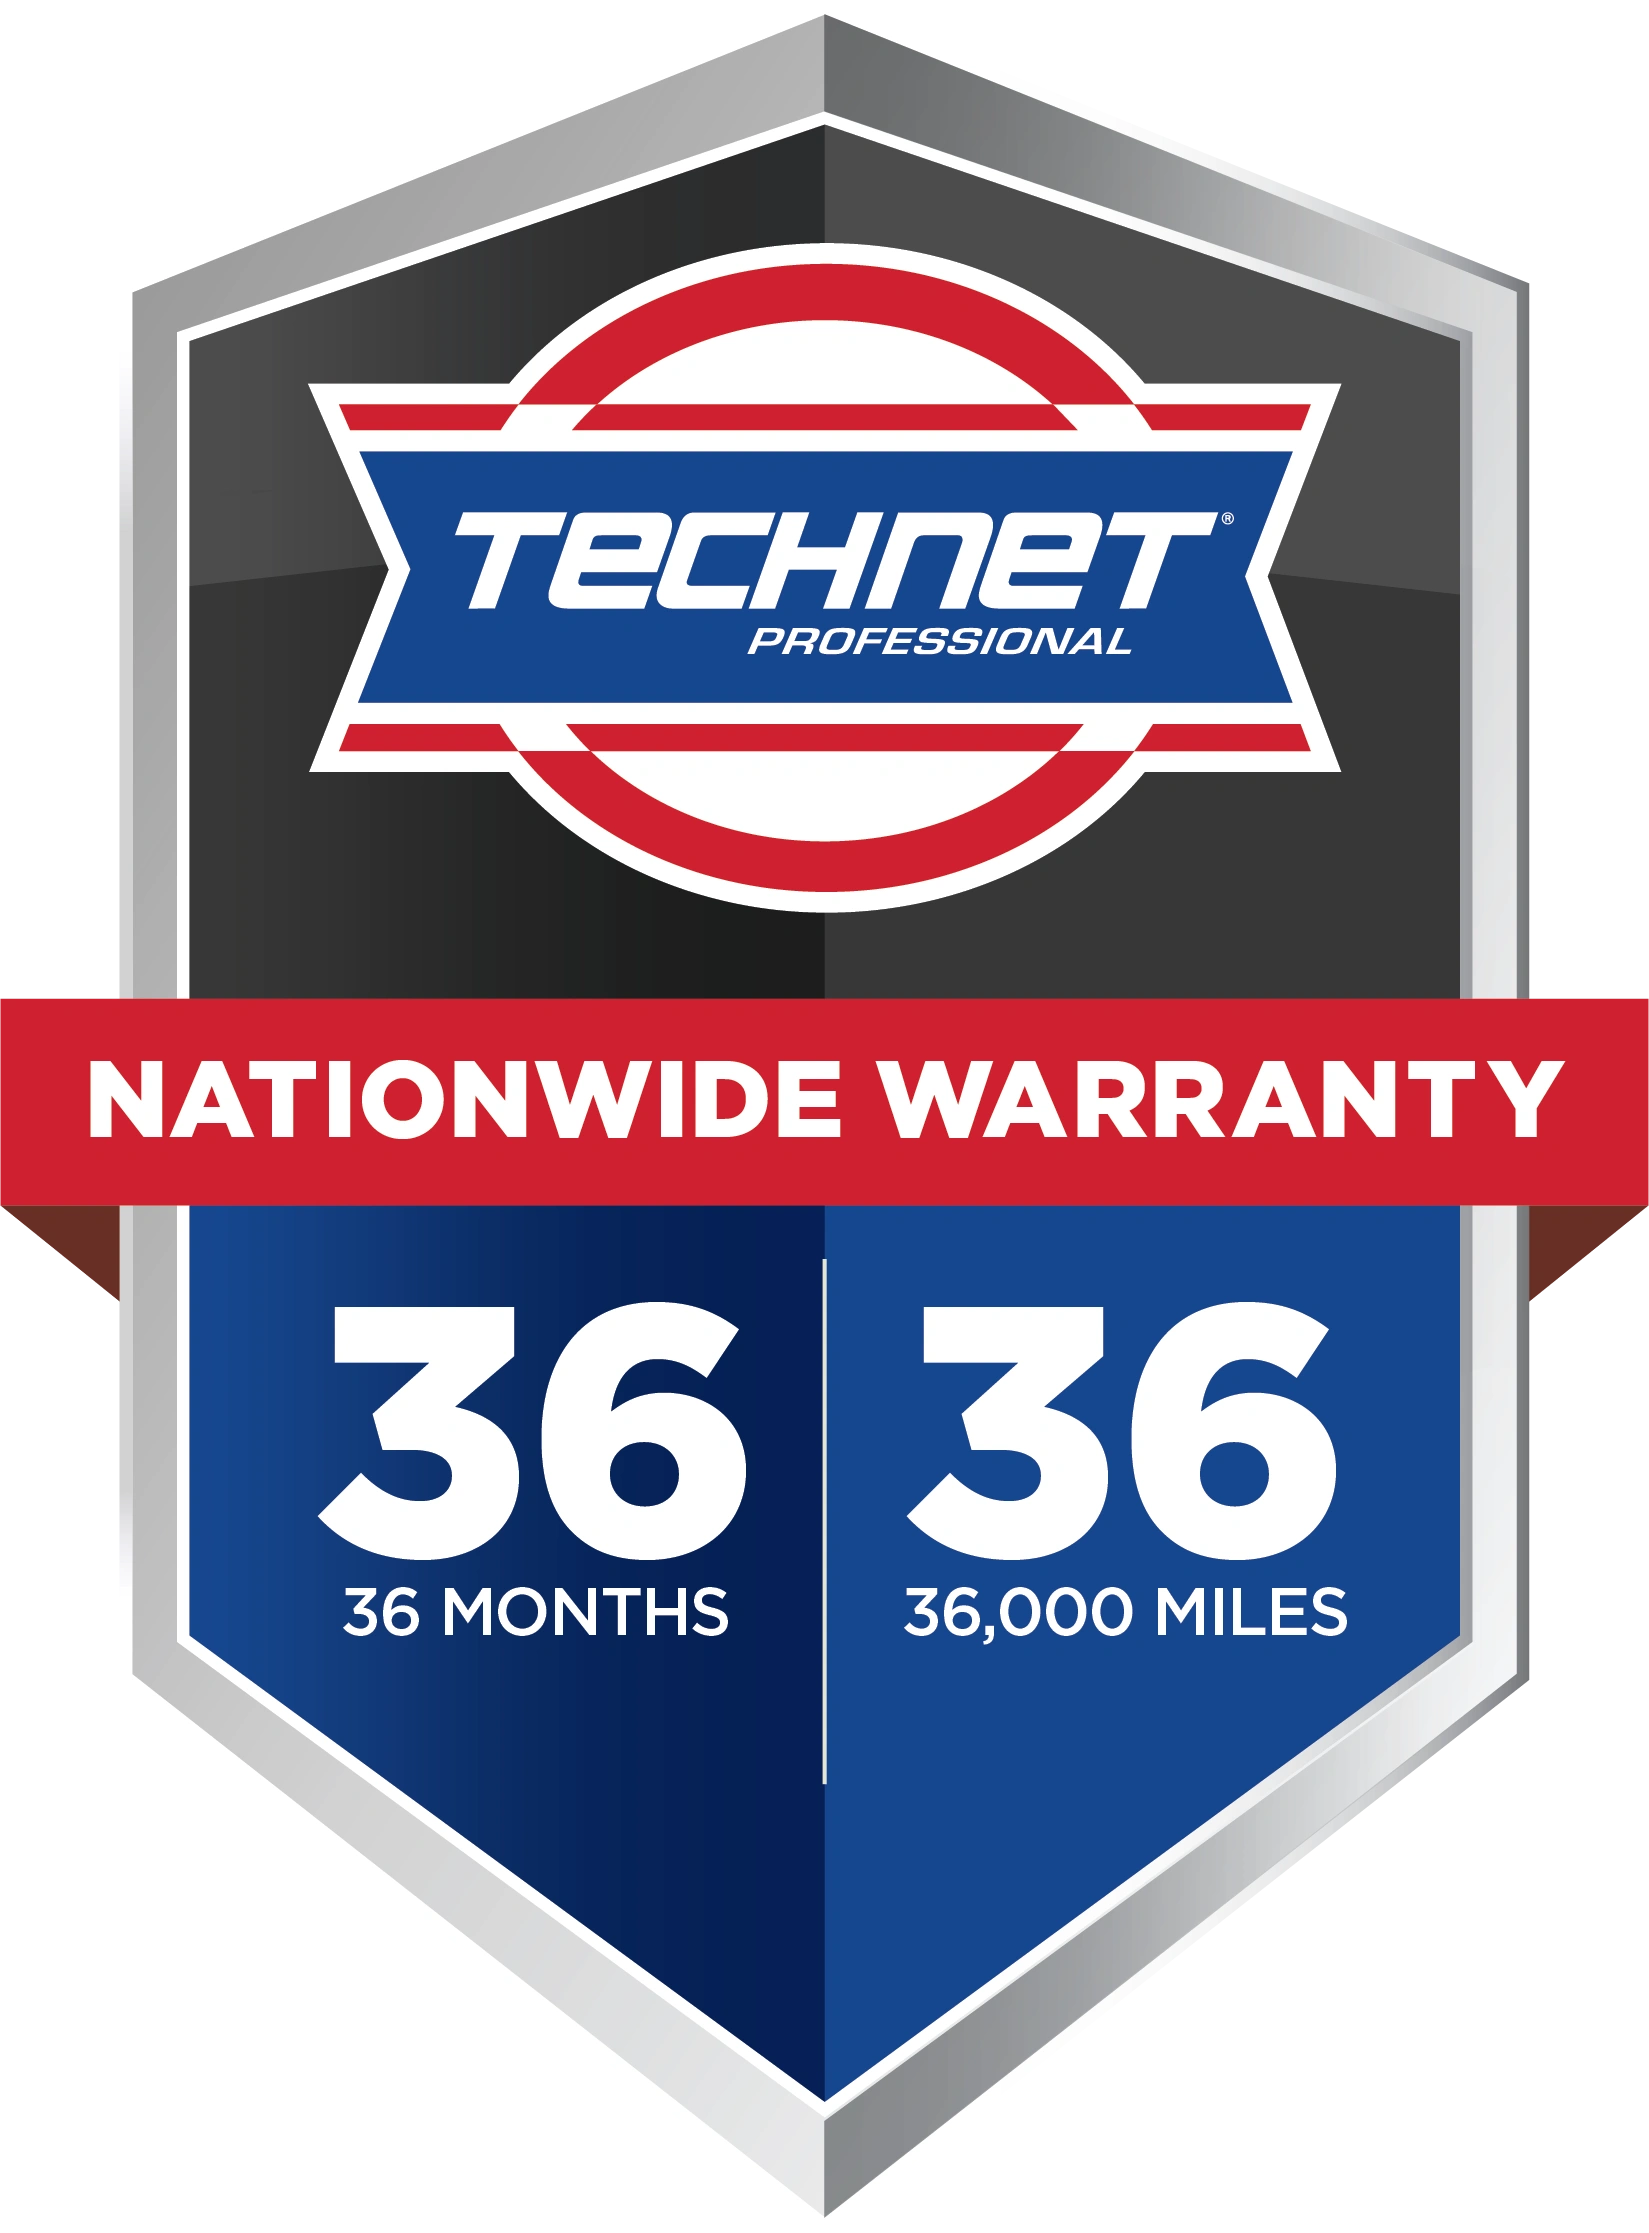 Faithful has the best Nationwide Warranty in the area. We've got you covered 36/36!  Quality work!